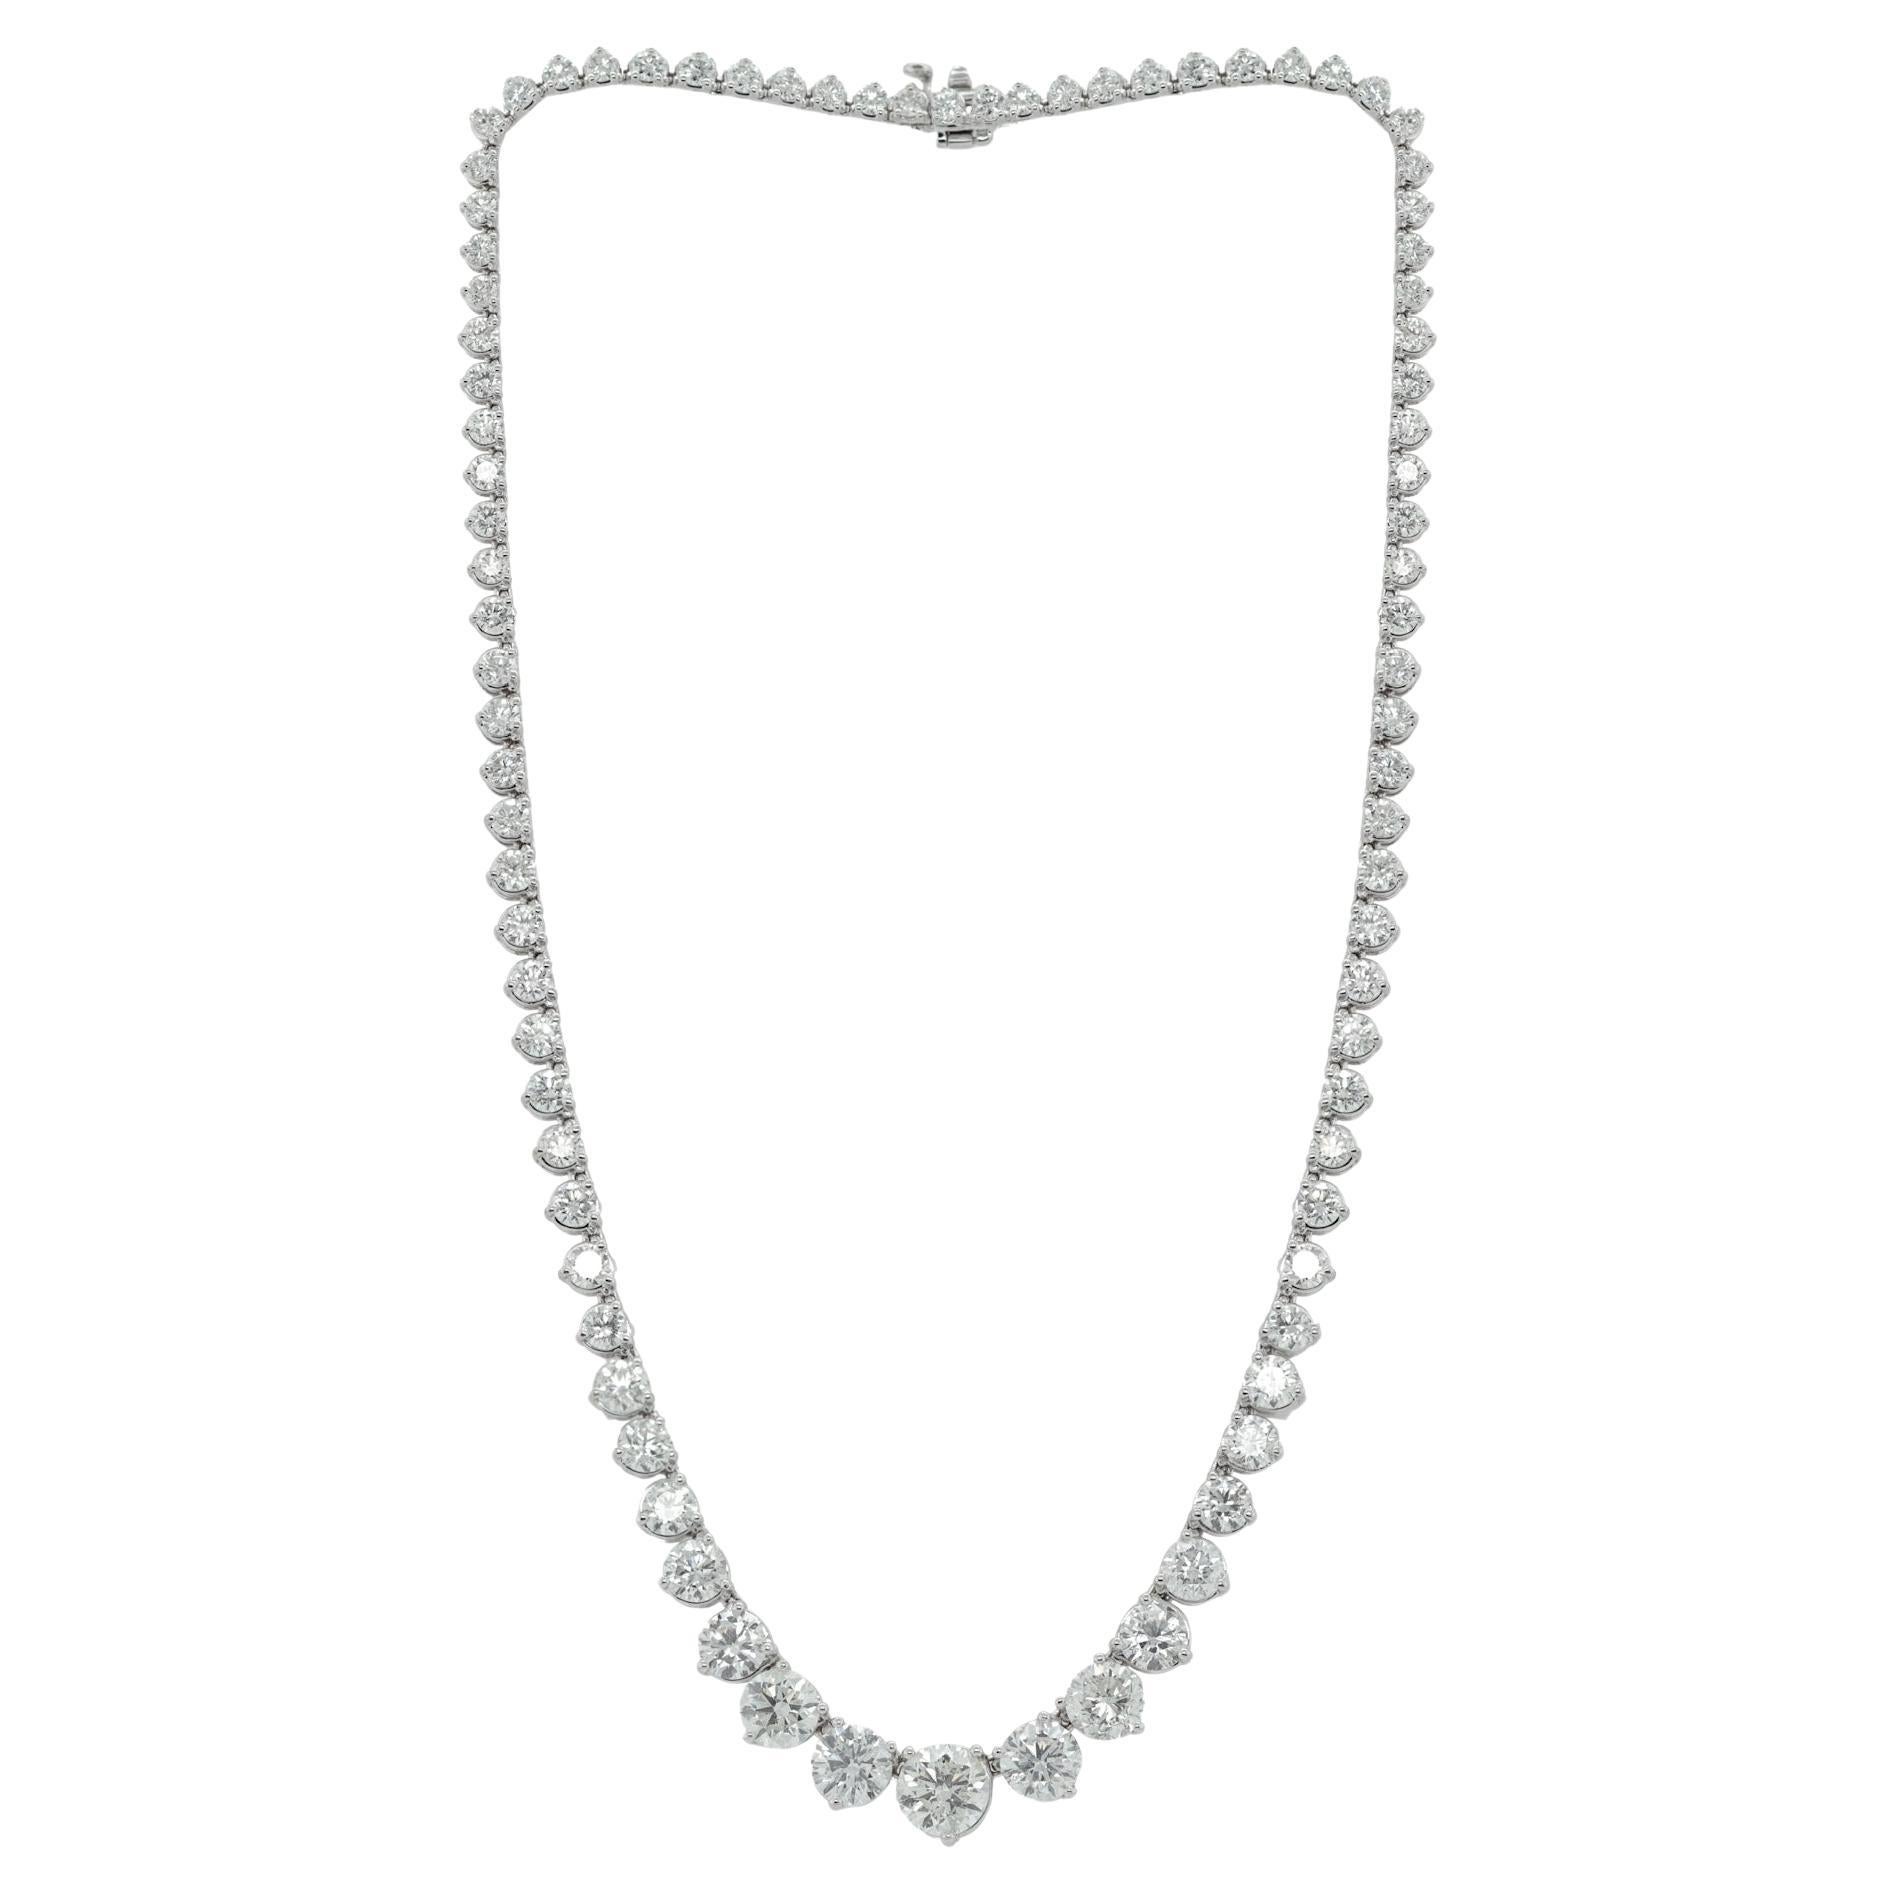 Diana M. 18kt White Gold Graduated  Riviera Tennis Necklace  24.45 cts 3-prong For Sale